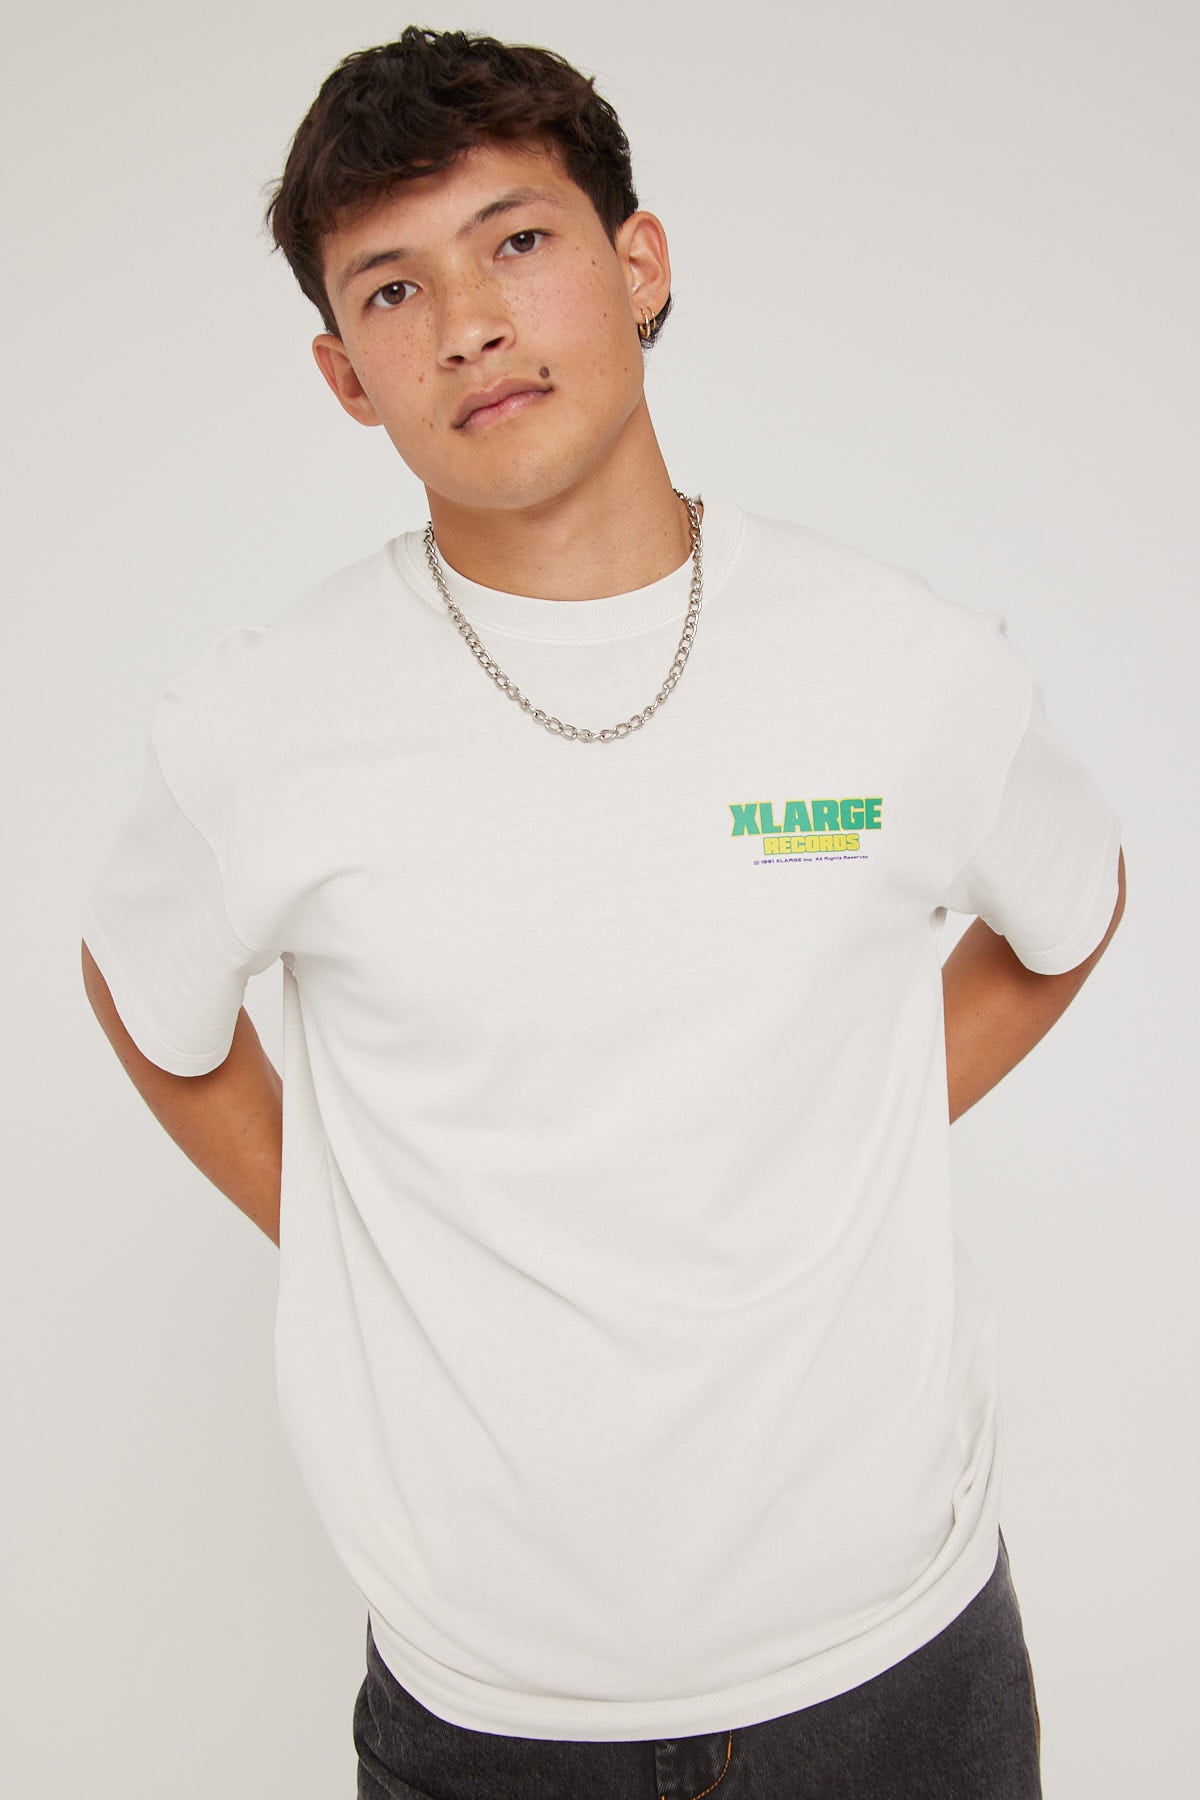 Xlarge Records Tee Pigment Washed White